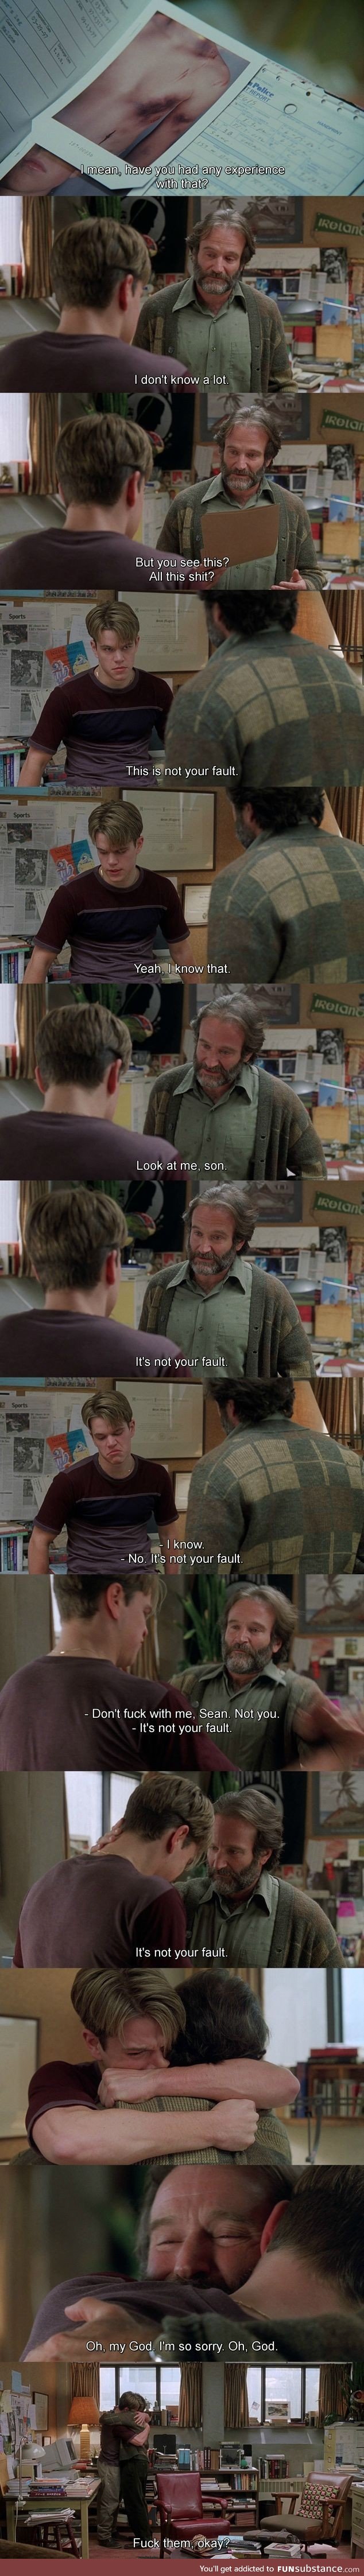 It's not your fault ["Good will hunting" on abuse]